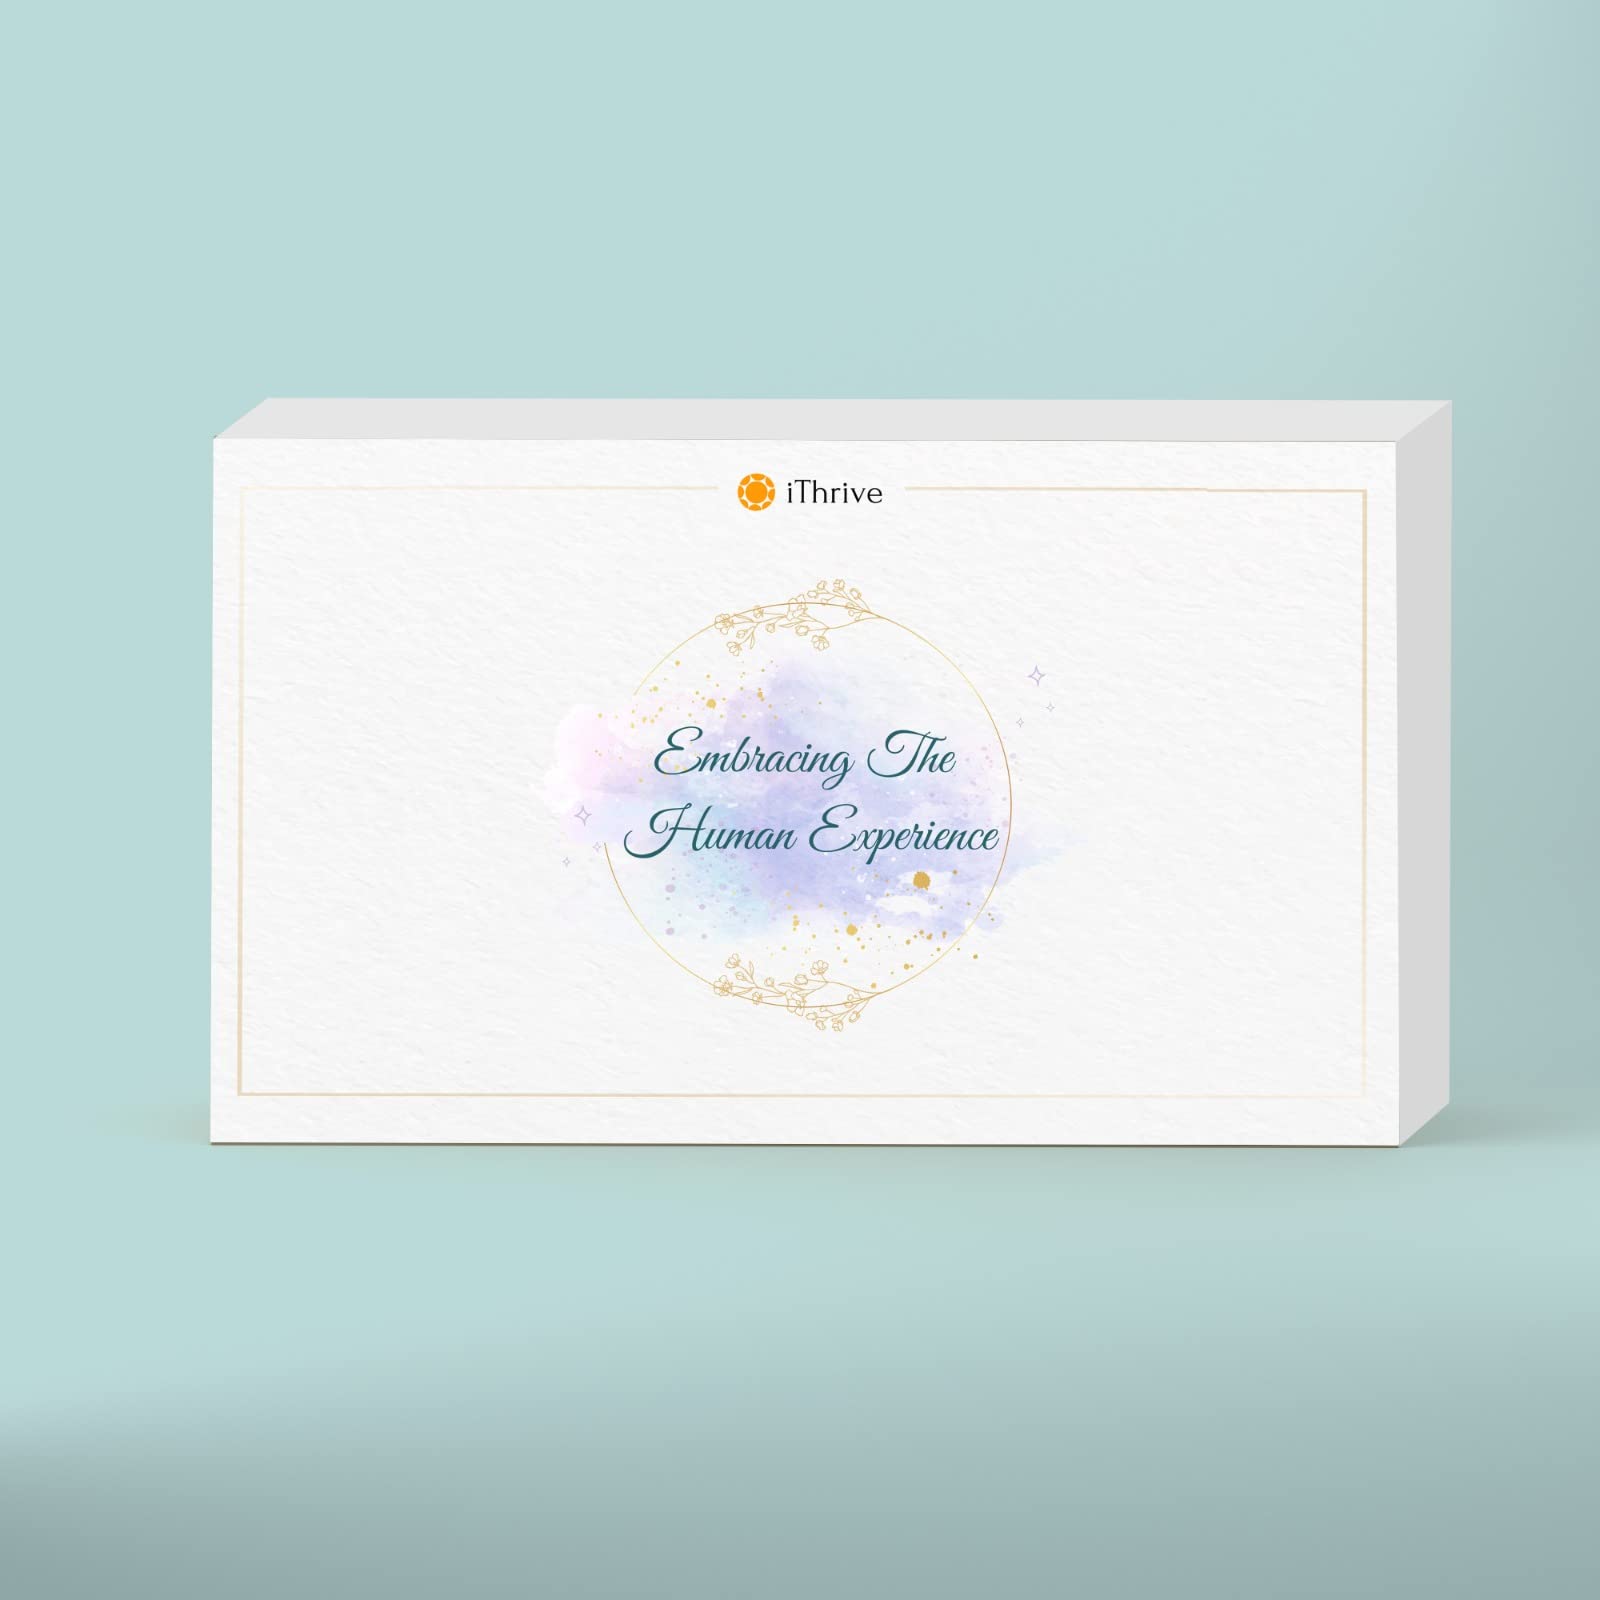 iTHRIVE Tiny Acts of Self-Care: Daily Affirmation Action Cards | Embracing the Human Experience iThrive Essentials